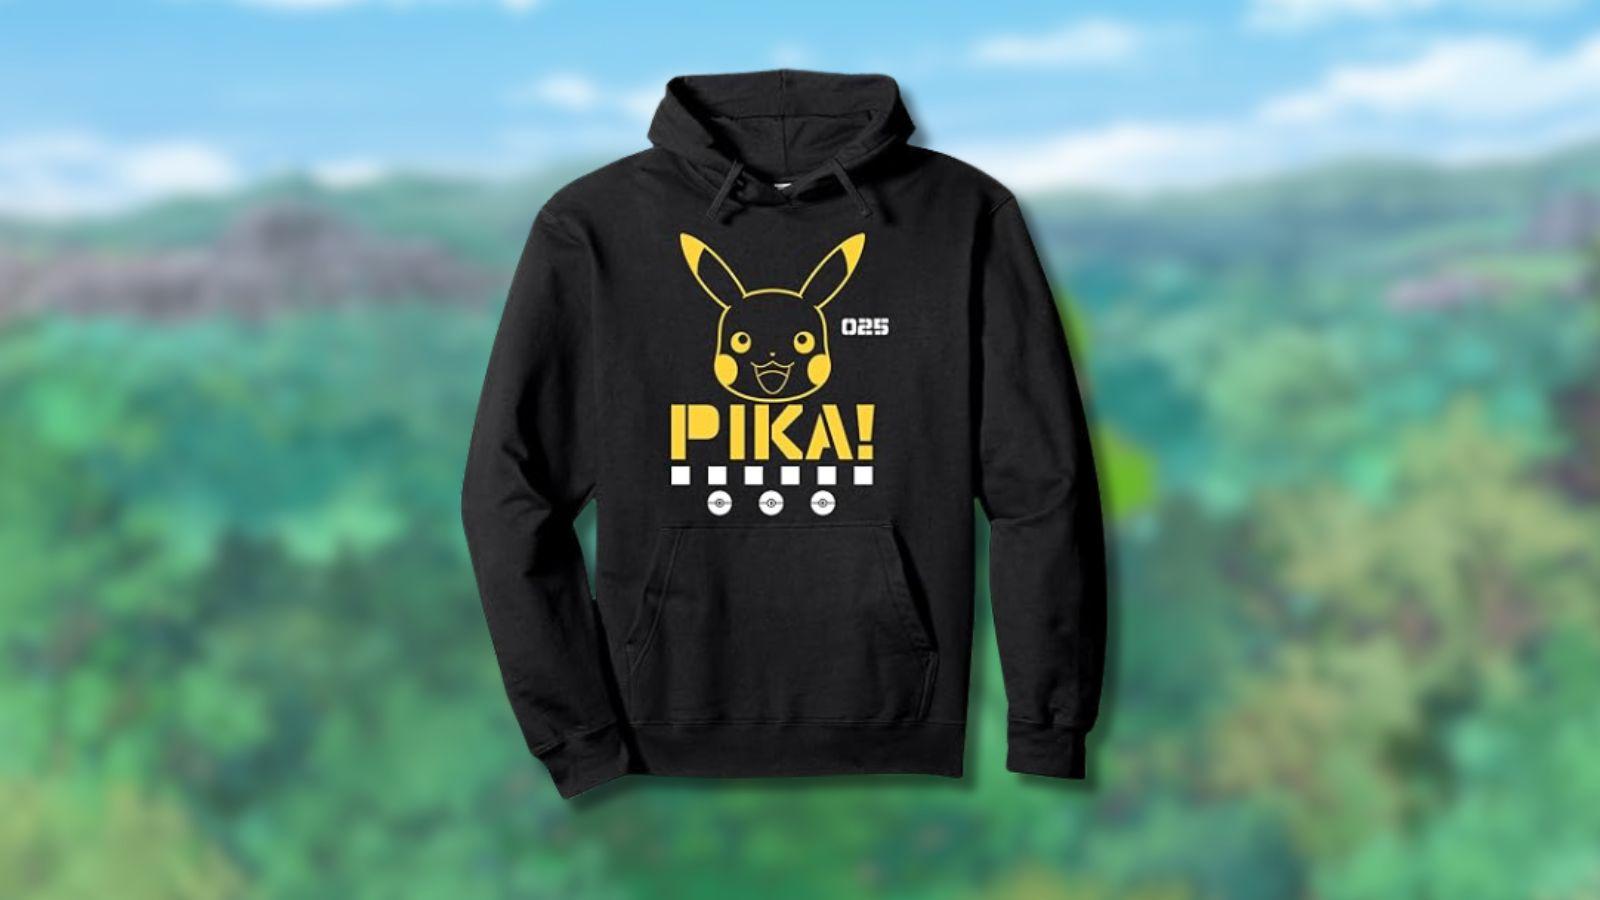 Pikachu hoodie with game background.